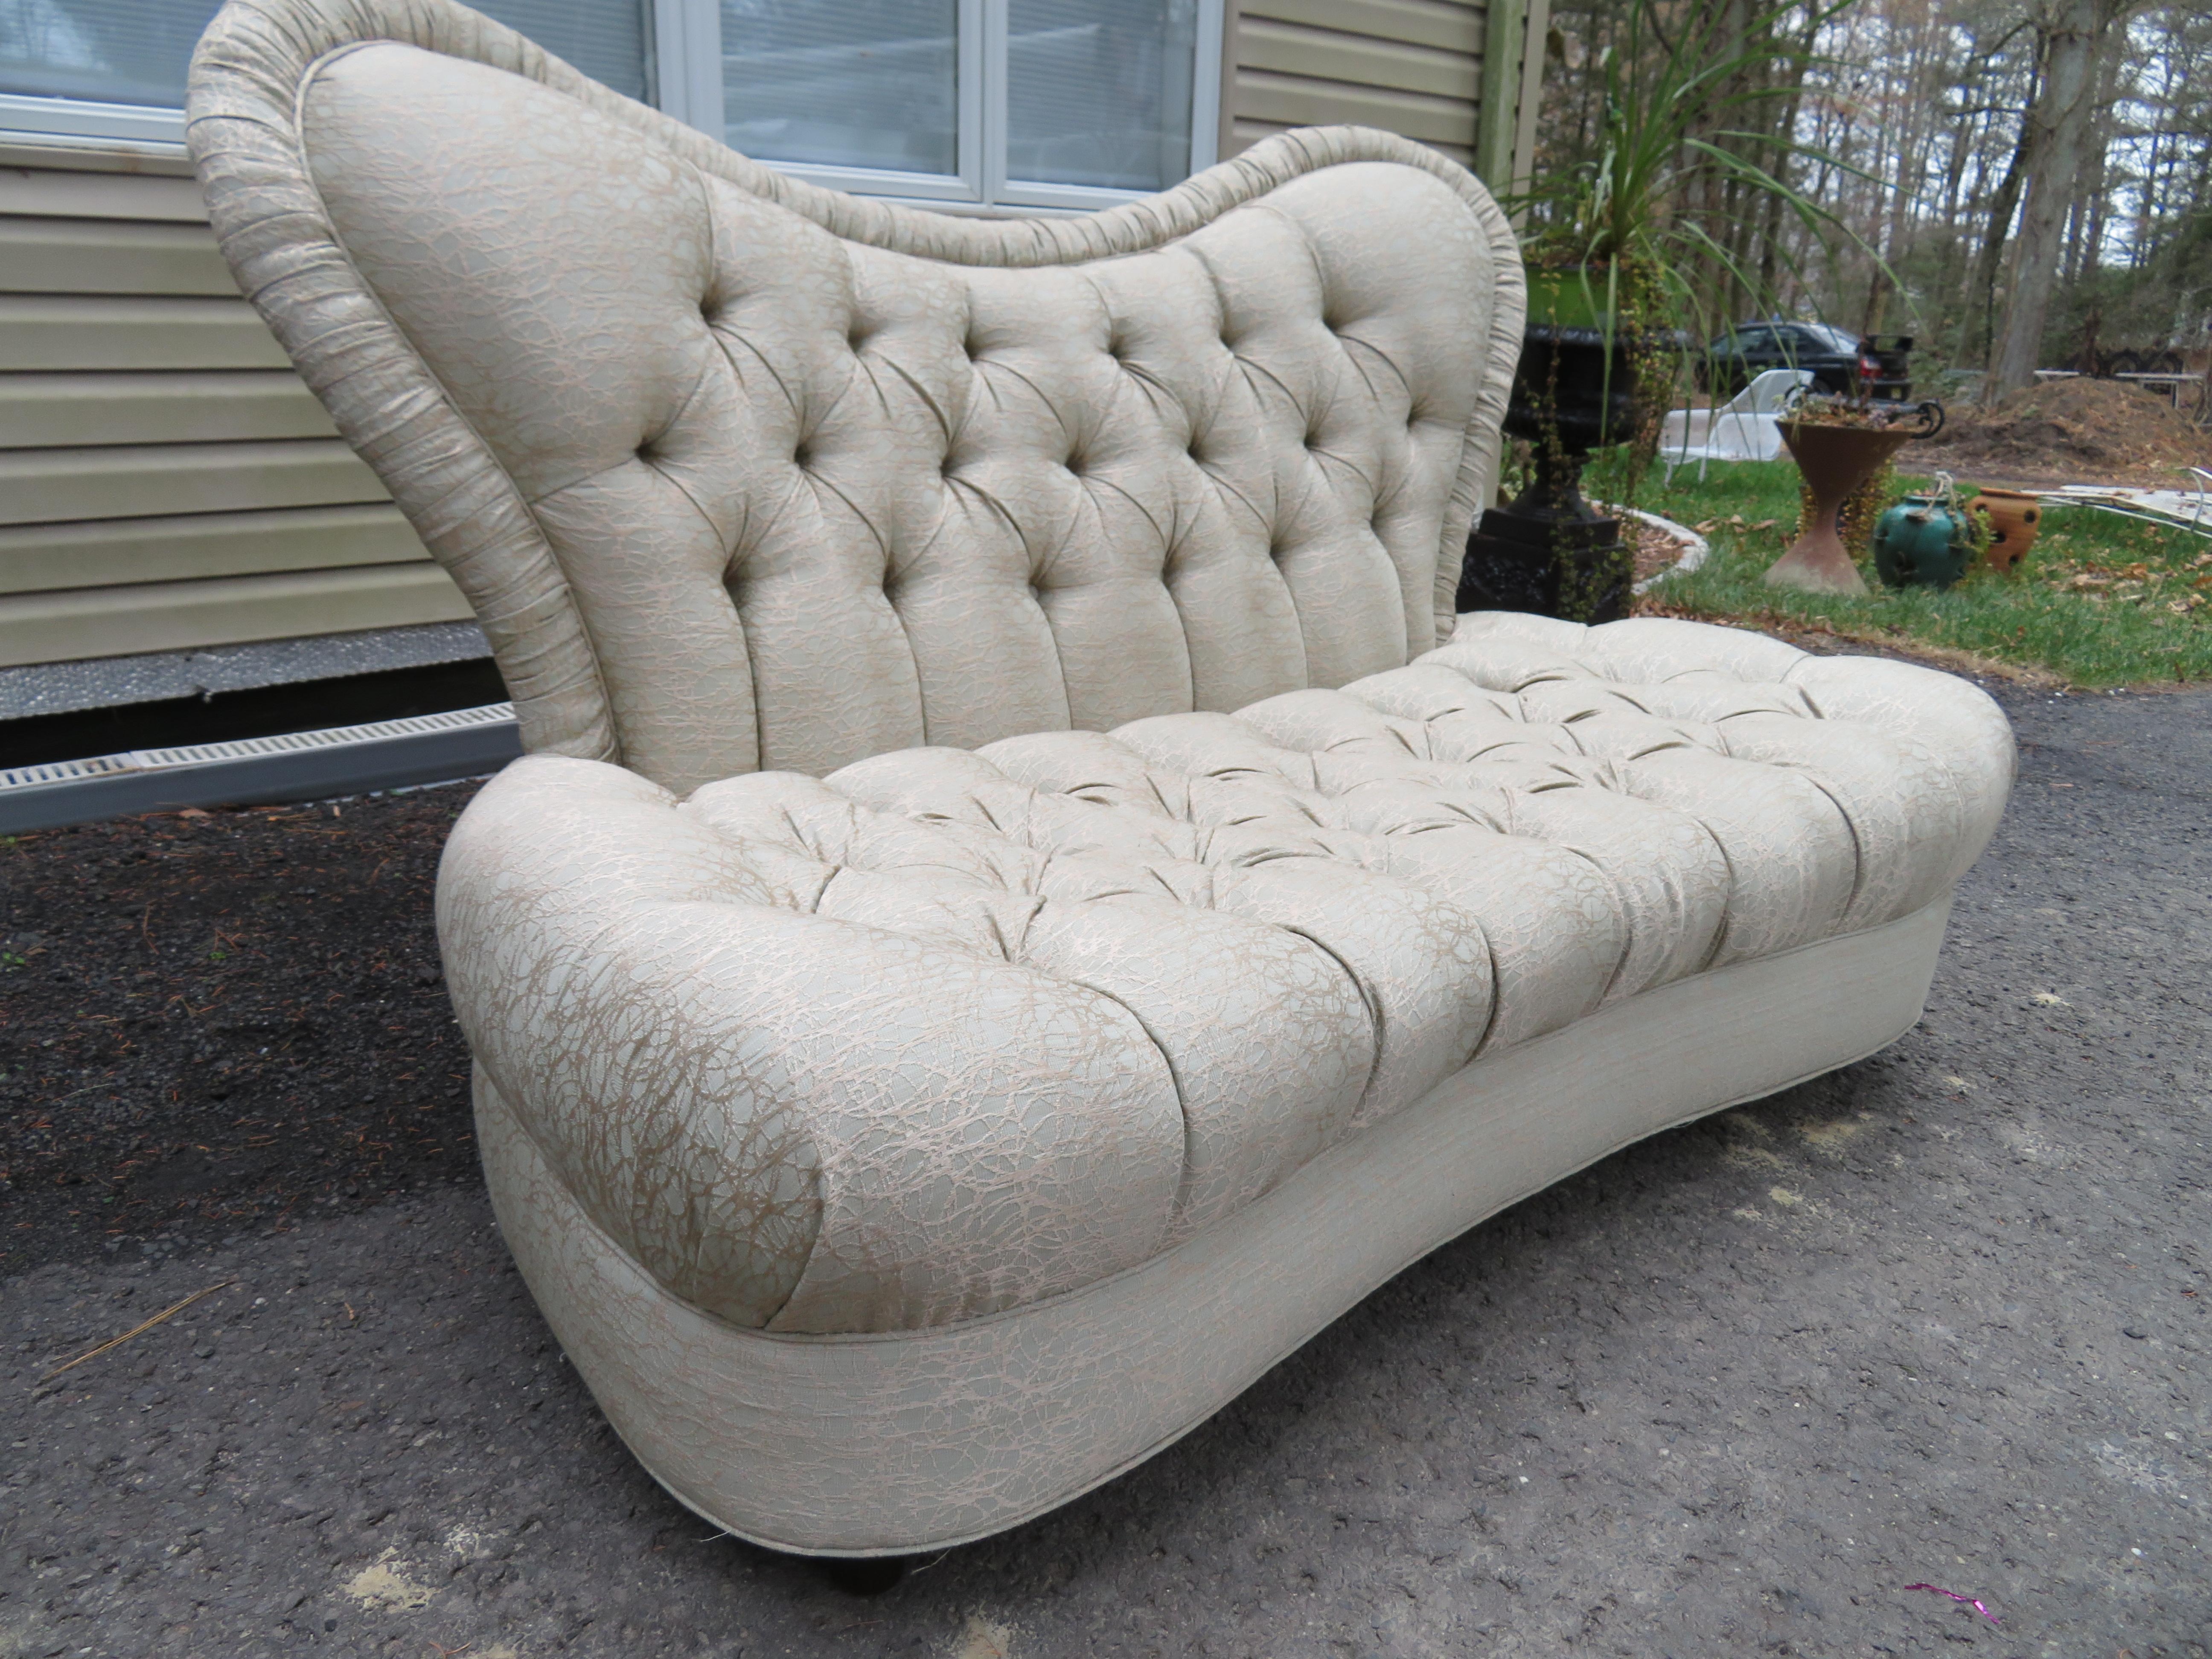 Amazing and fun Hollywood Regency tall back loveseat. WOW this sofa is just gorgeous in person-a really special piece!!